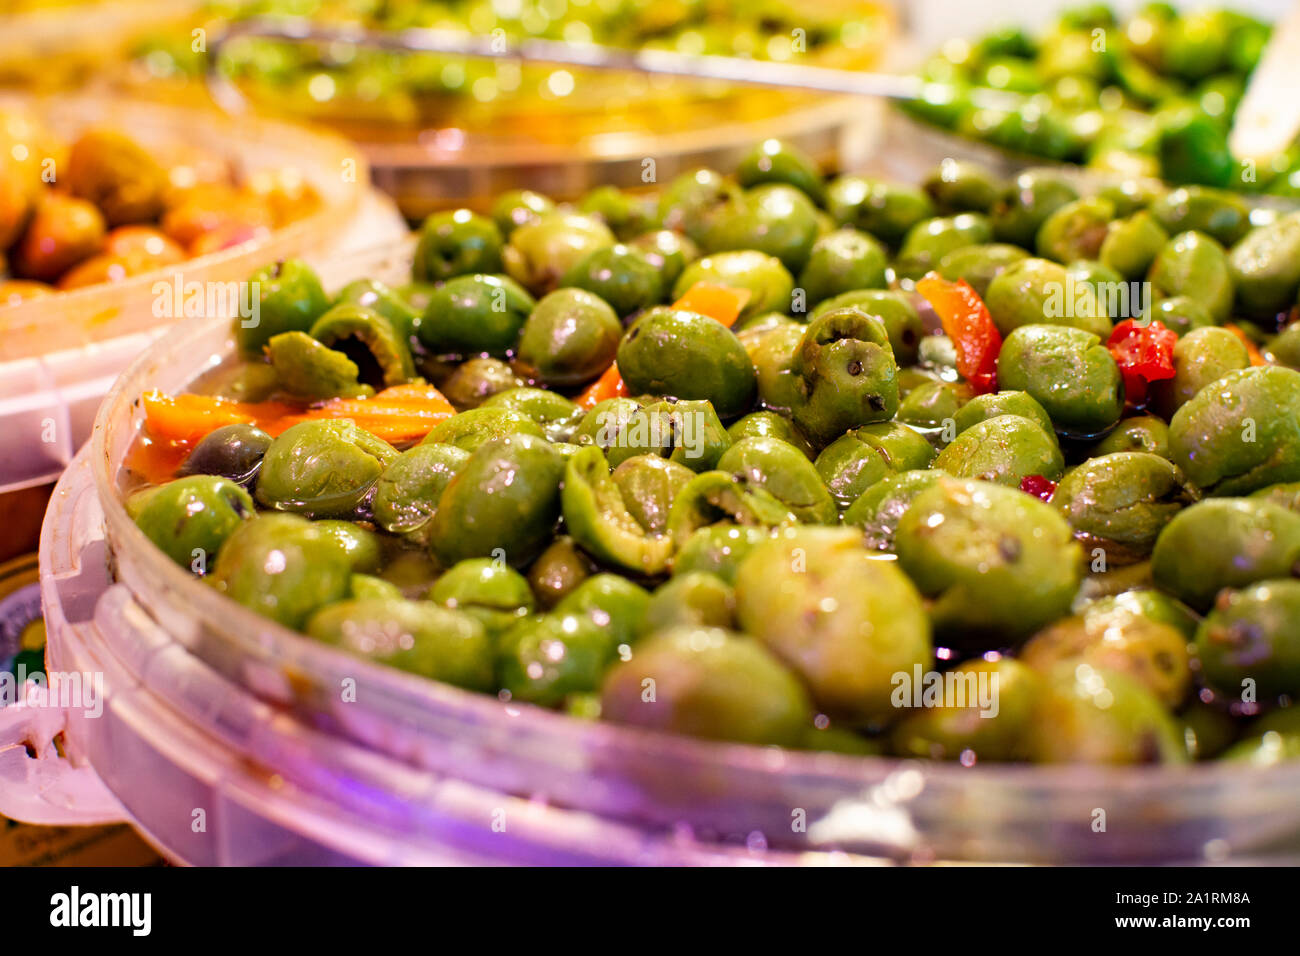 Homemade pickled green olives with garlic and spices in bucket on spanish market Stock Photo